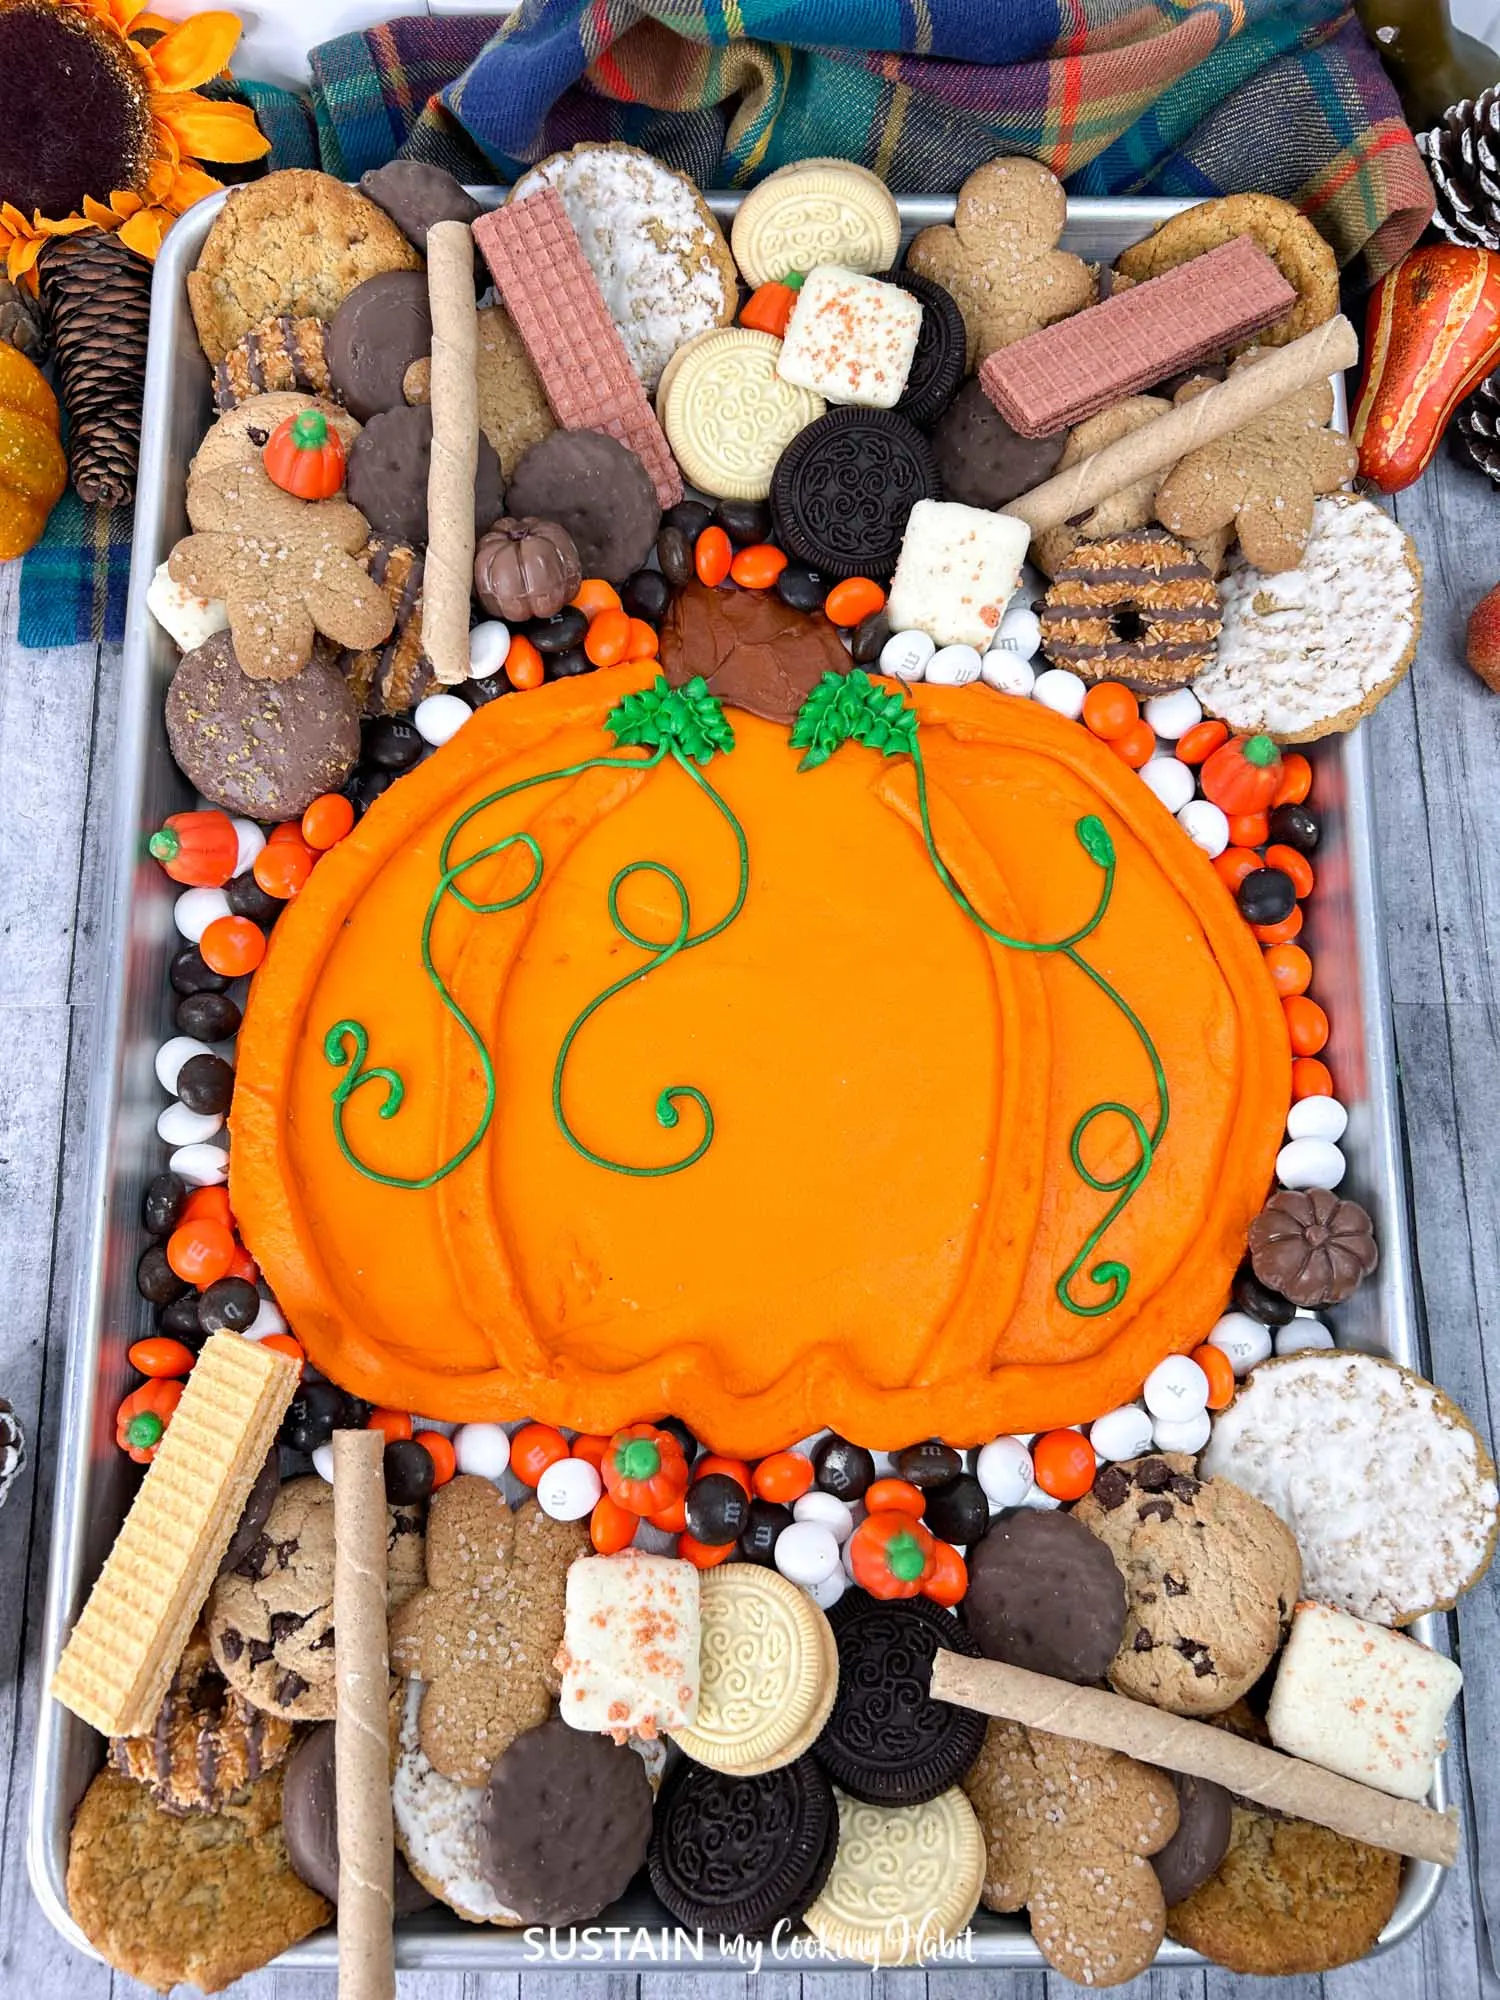 A dessert charcuterie board with a buttercream icing pumpkin perfect for dipping your favorite cookies.